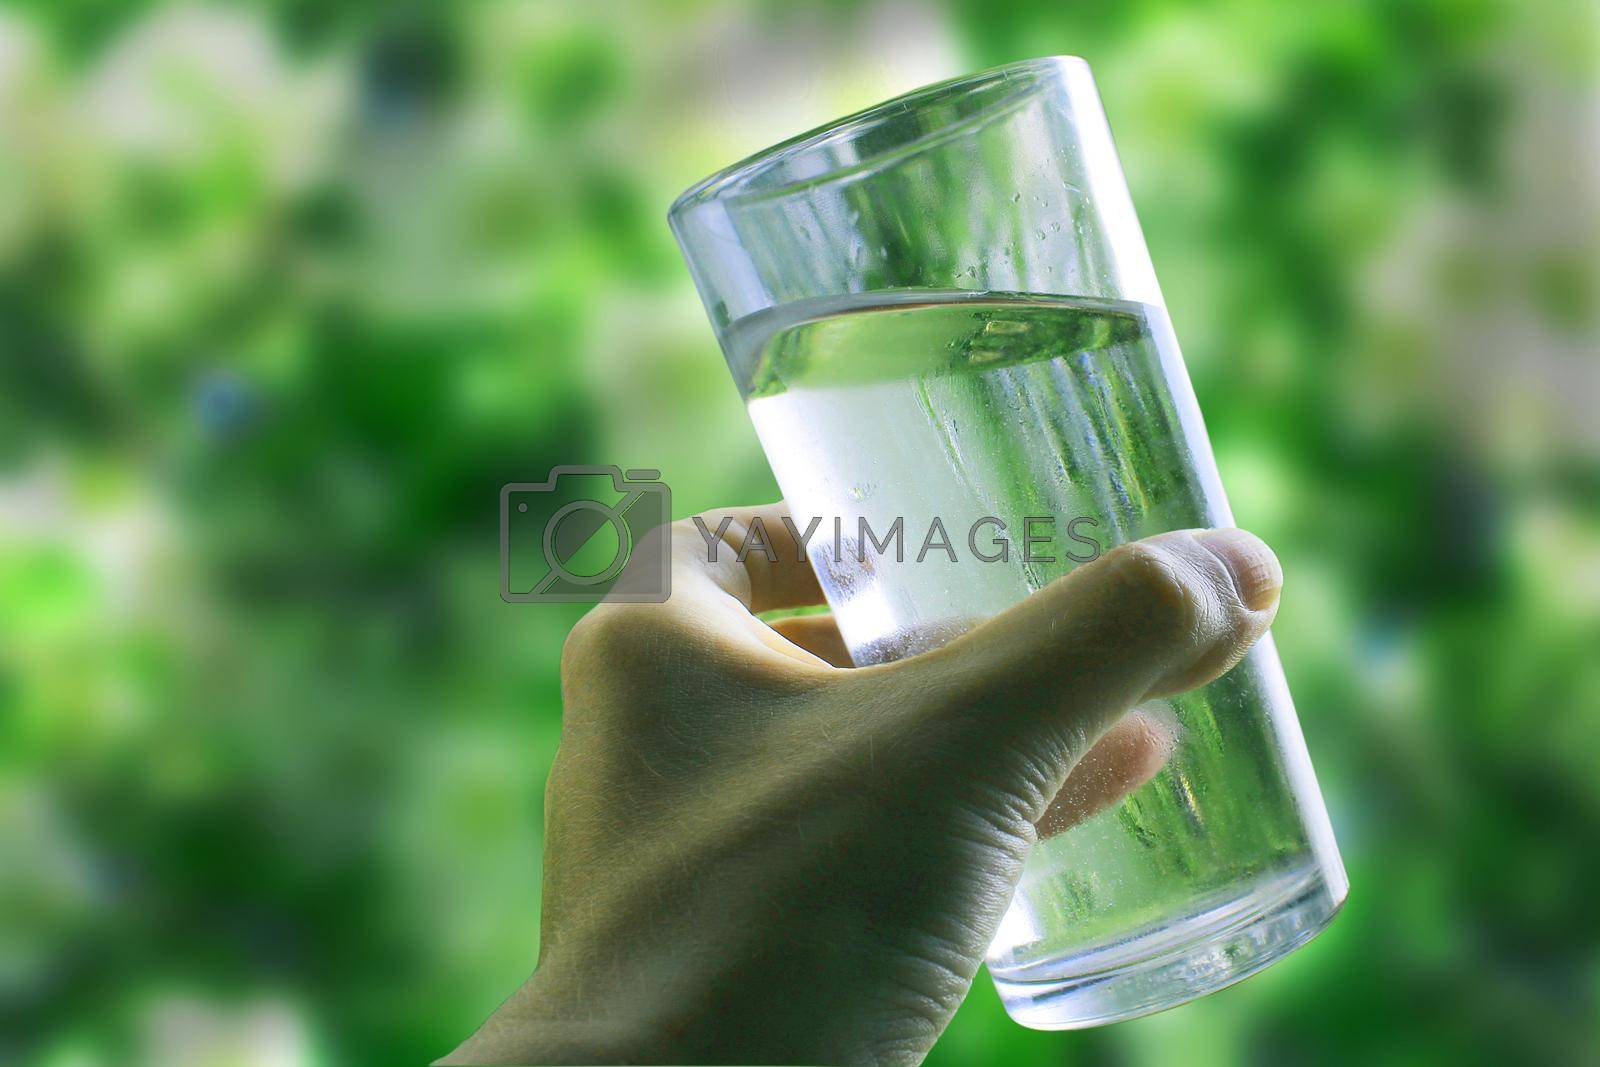 Royalty free image of A glass of water in a hand close-up on a natural green background outdoors. by IronG96